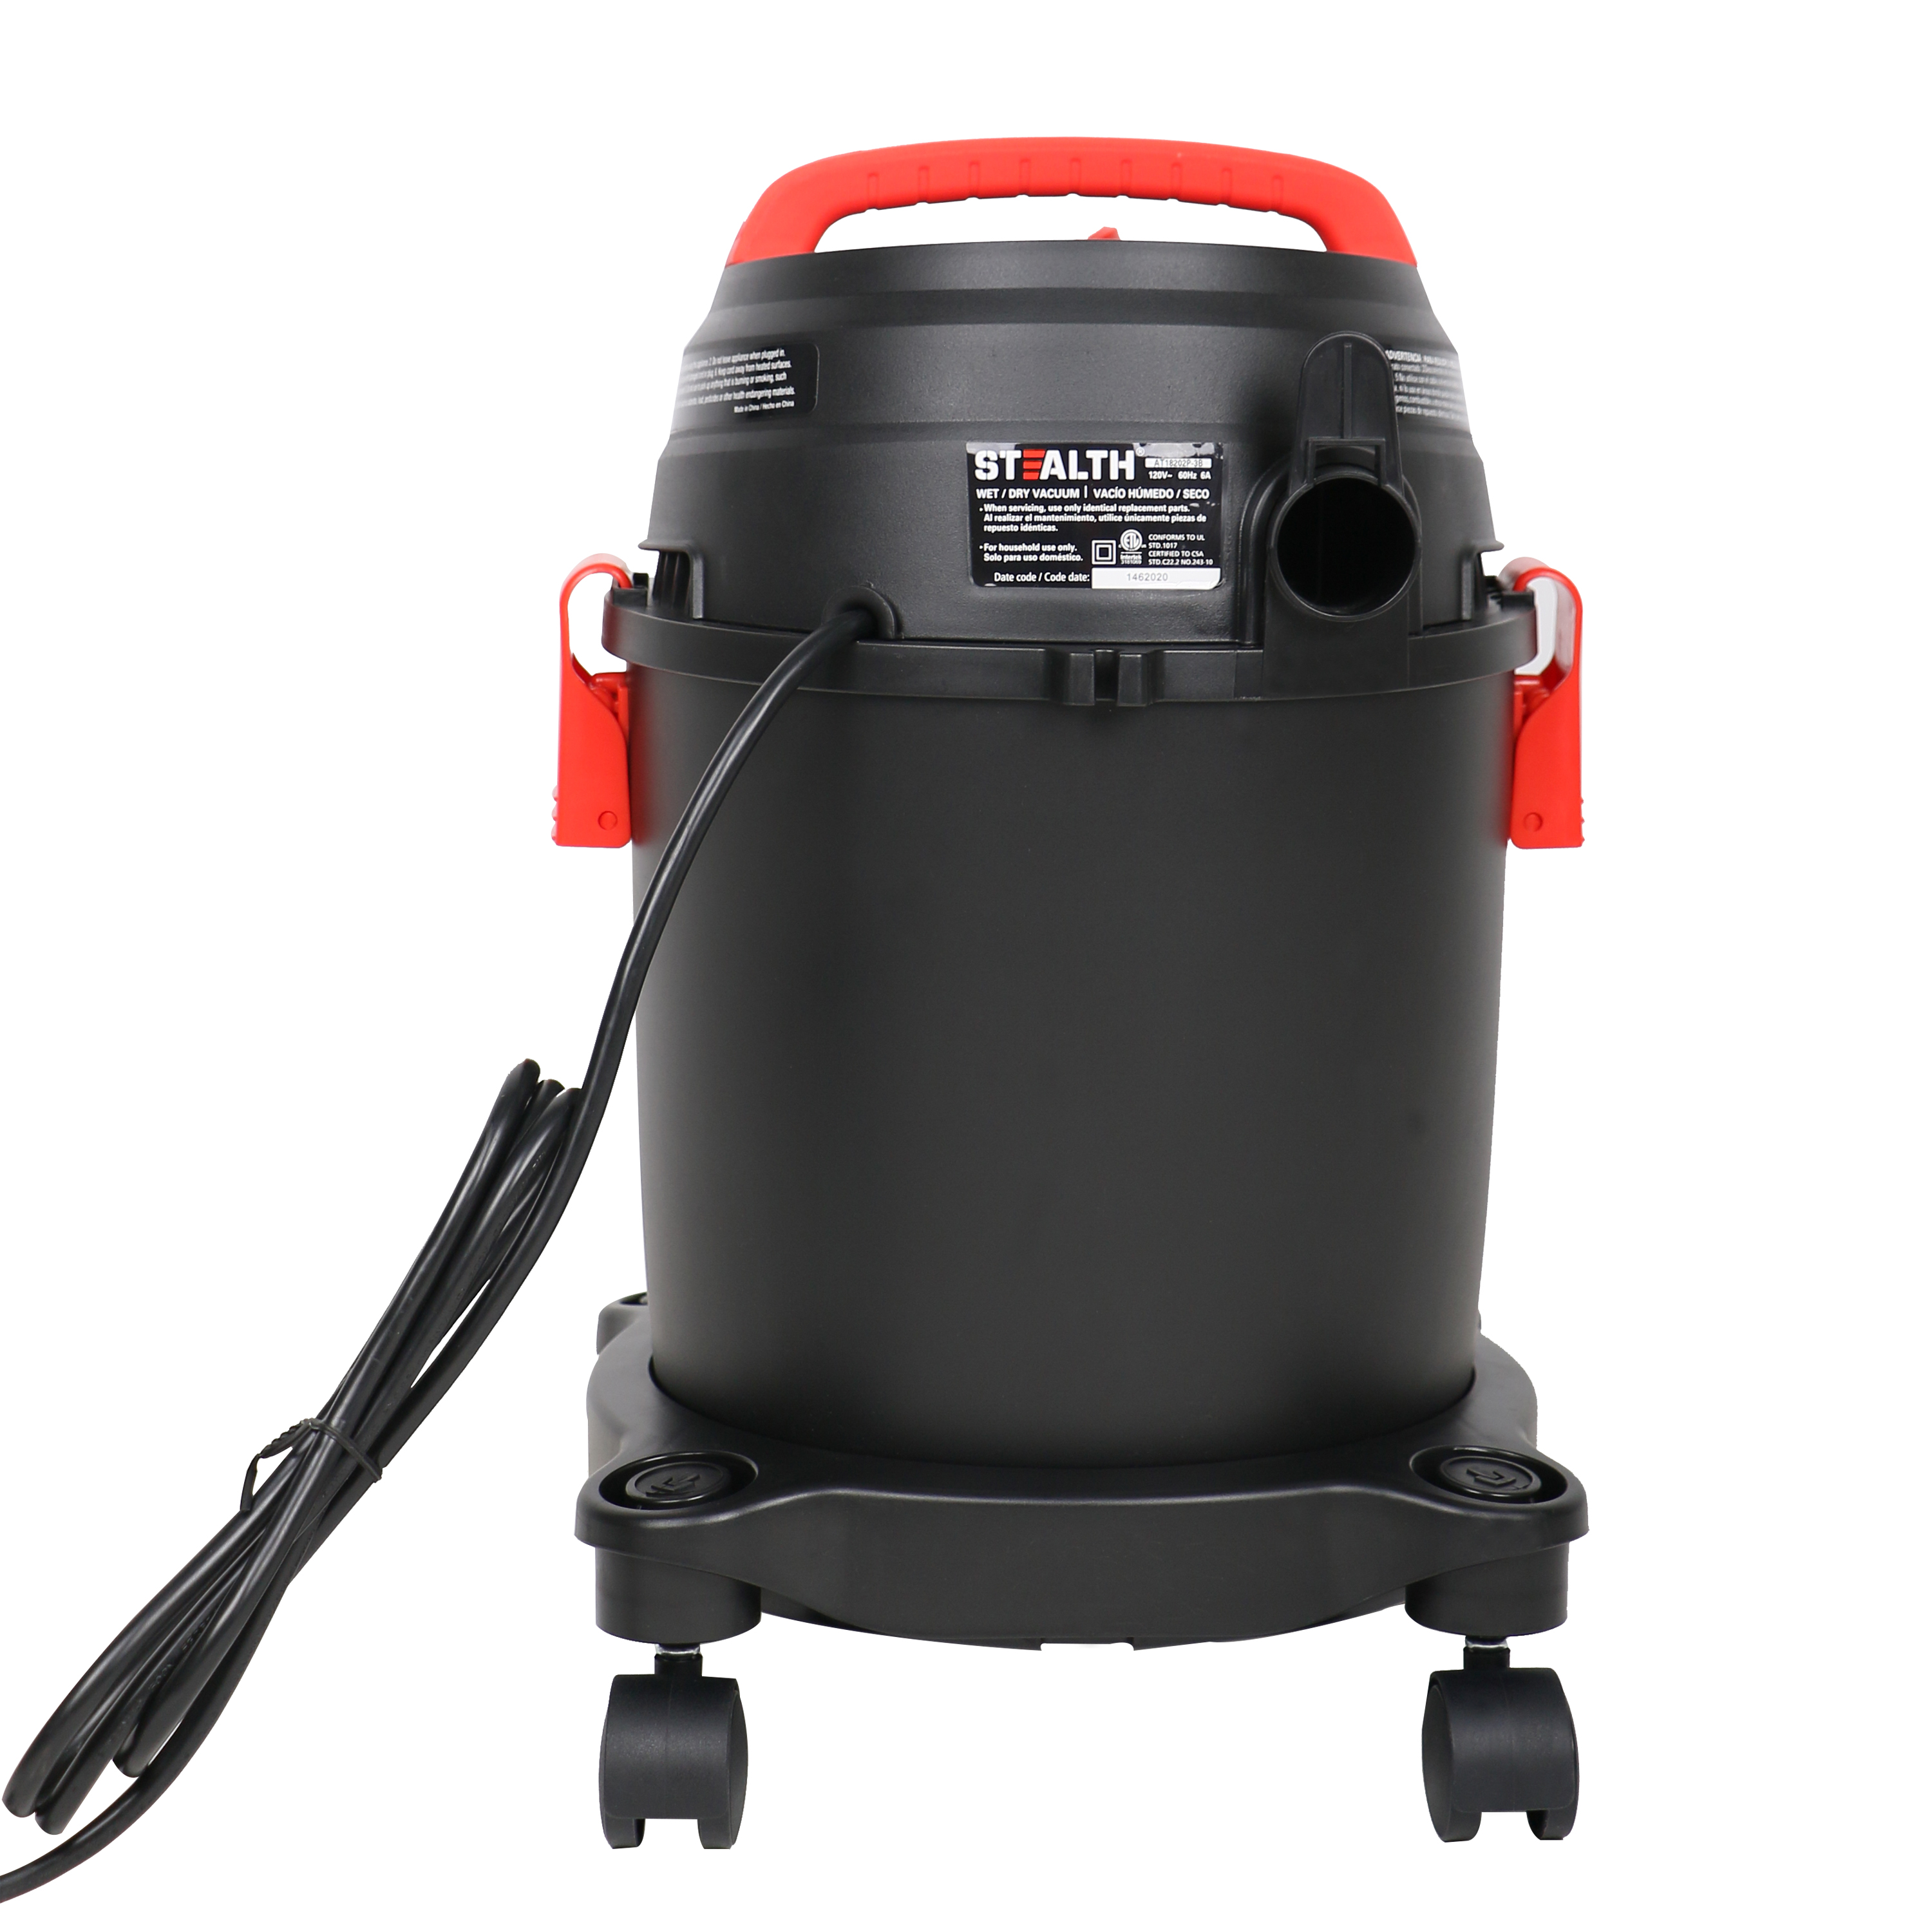 STEALTH 3 Gallon 3 Peak Horsepower Wet Dry Vacuum (AT18202P-3B) with Swiveling Casters - image 5 of 5